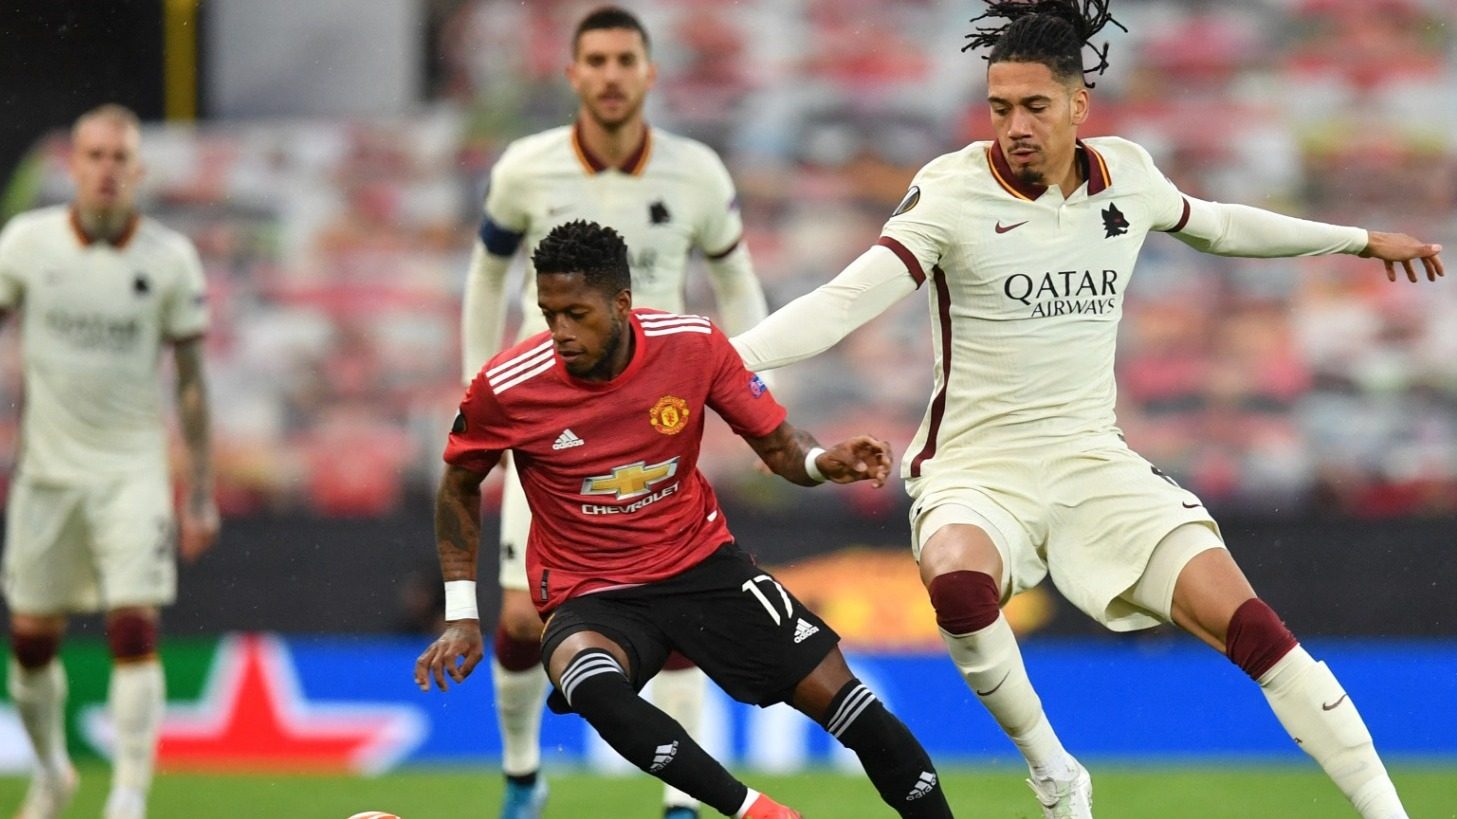 Uefa Europa League Semi Final Second Leg Watch Roma Vs Man United Live Streaming And Telecast In India